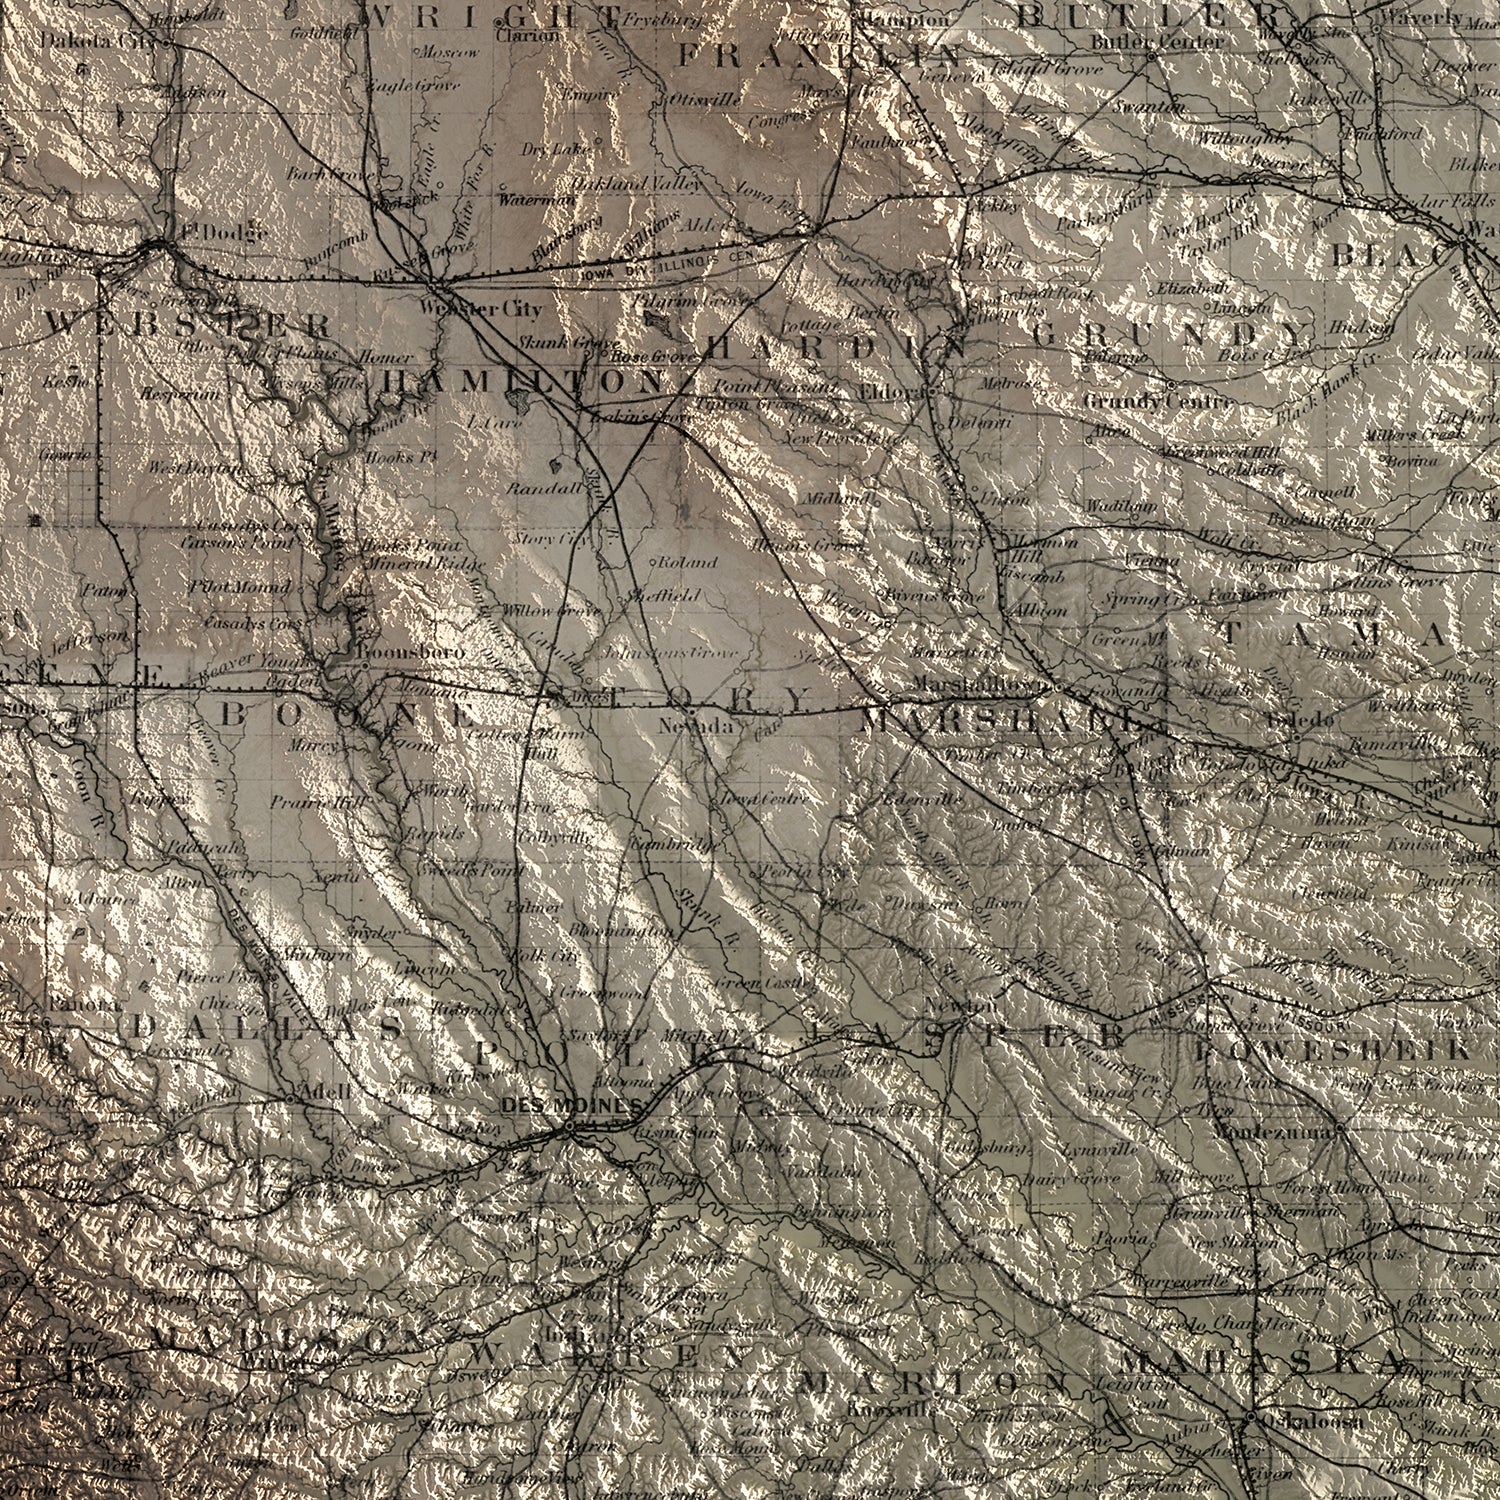 Iowa - Vintage Shaded Relief Map (1874)